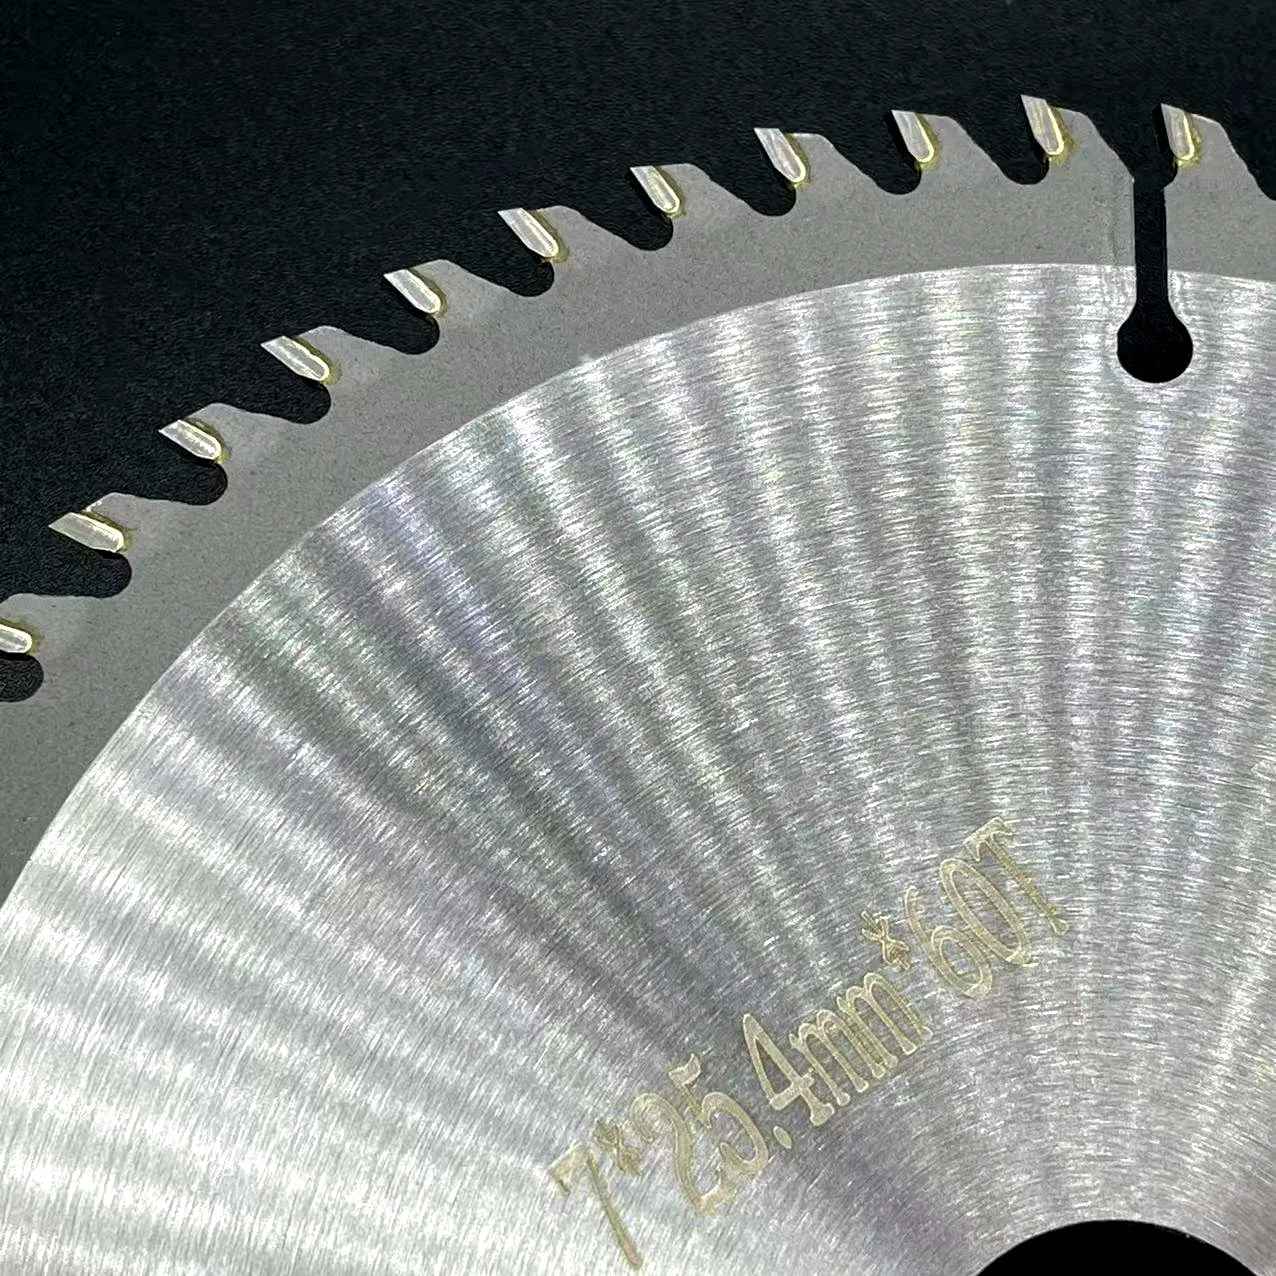 7 inches Diameter 180mm Mulitpurpose TCT Circular Saw Blade Woodworking 40T/60T/80T Cutting Disc Carbide Tipped Saw Blade Tools